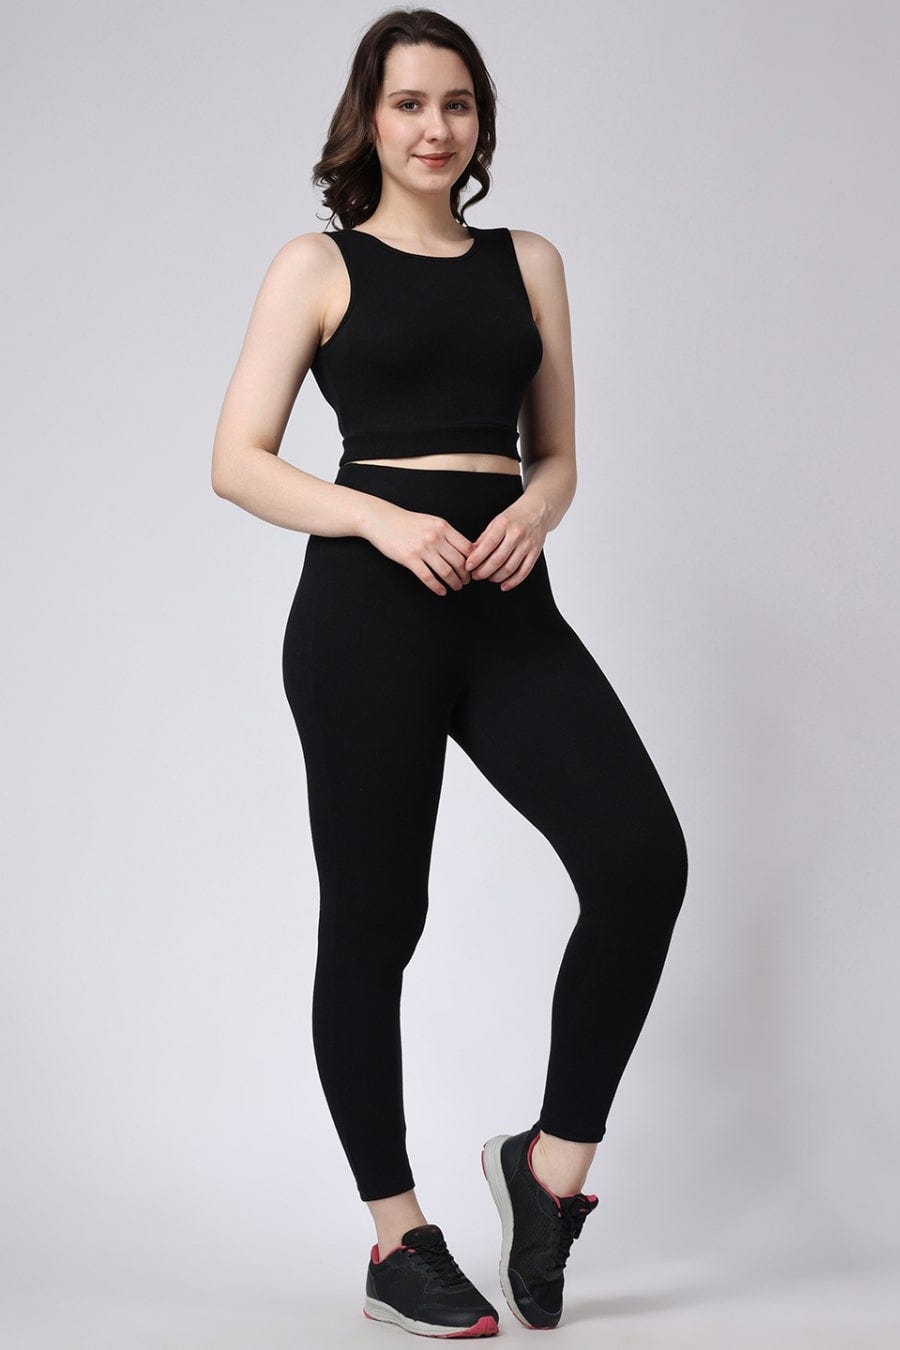 Empower Your Workout with Stellar Style: 10 Fashionable Workout